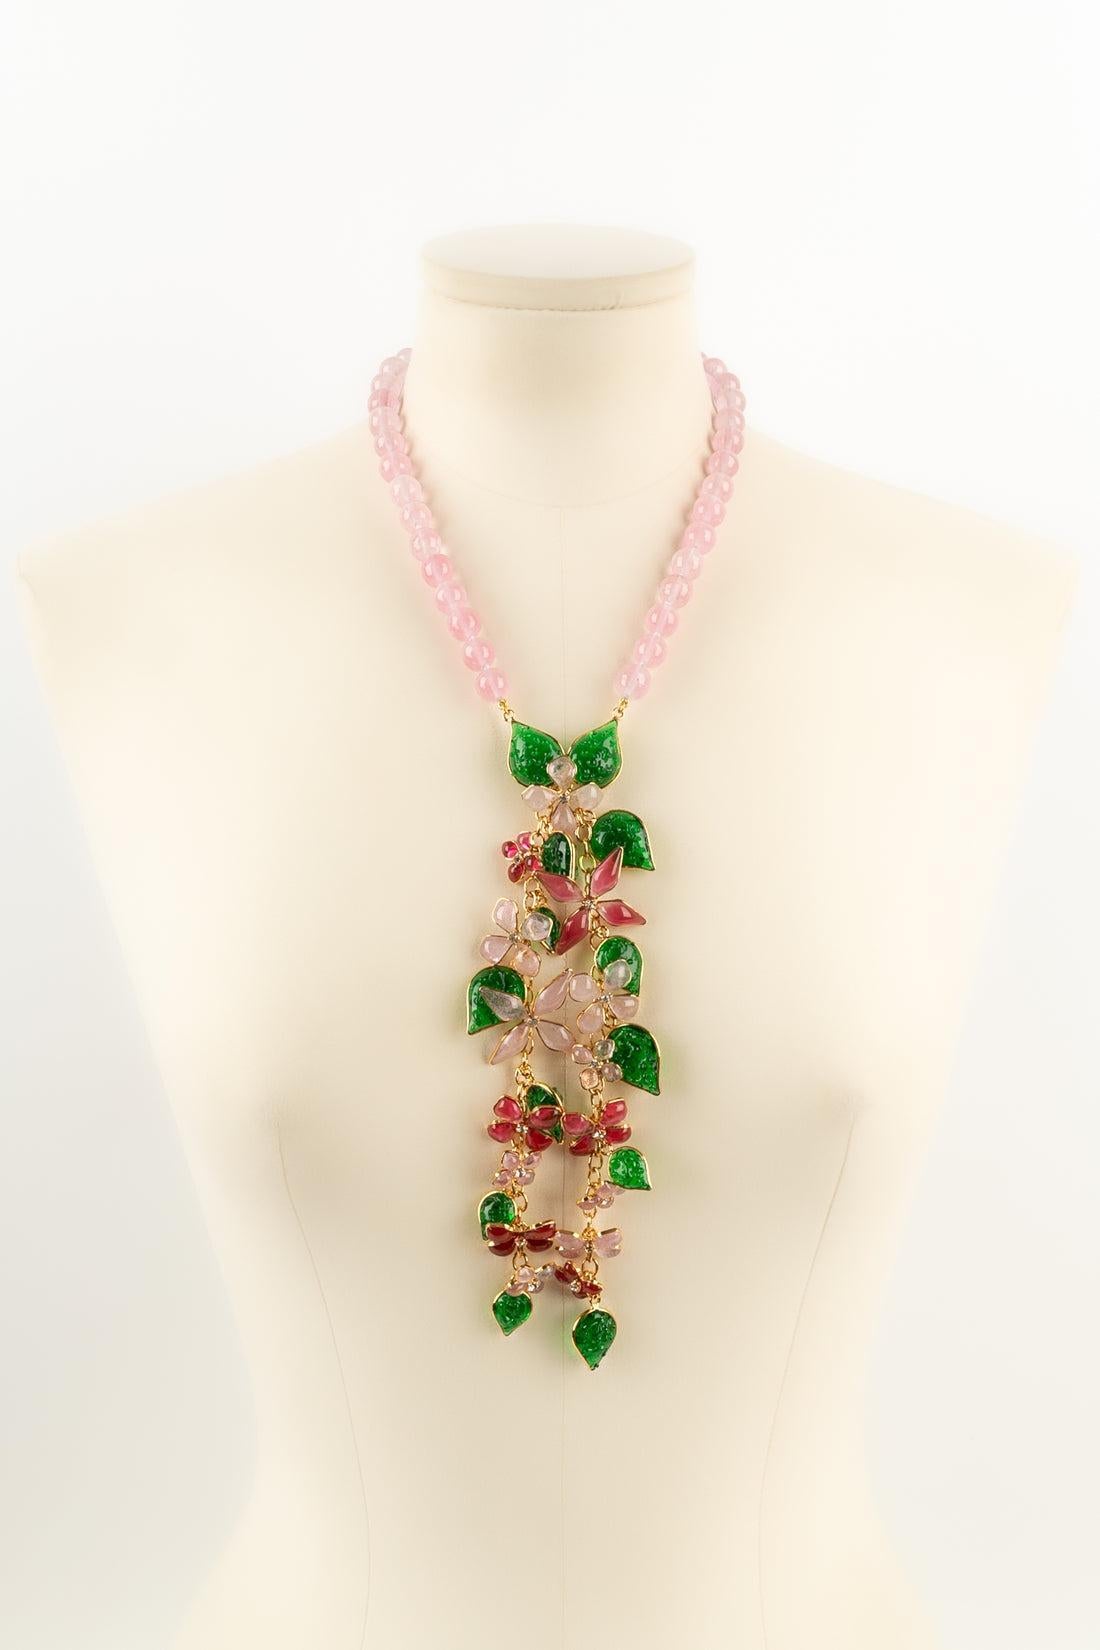 Augustine - (Made in France) Necklace in gold-plated metal and glass paste in pink and green tones representing flowers.

Additional information:
Condition: Very good condition
Dimensions: Length: from 46 cm to 51 cm

Seller Reference: BC106